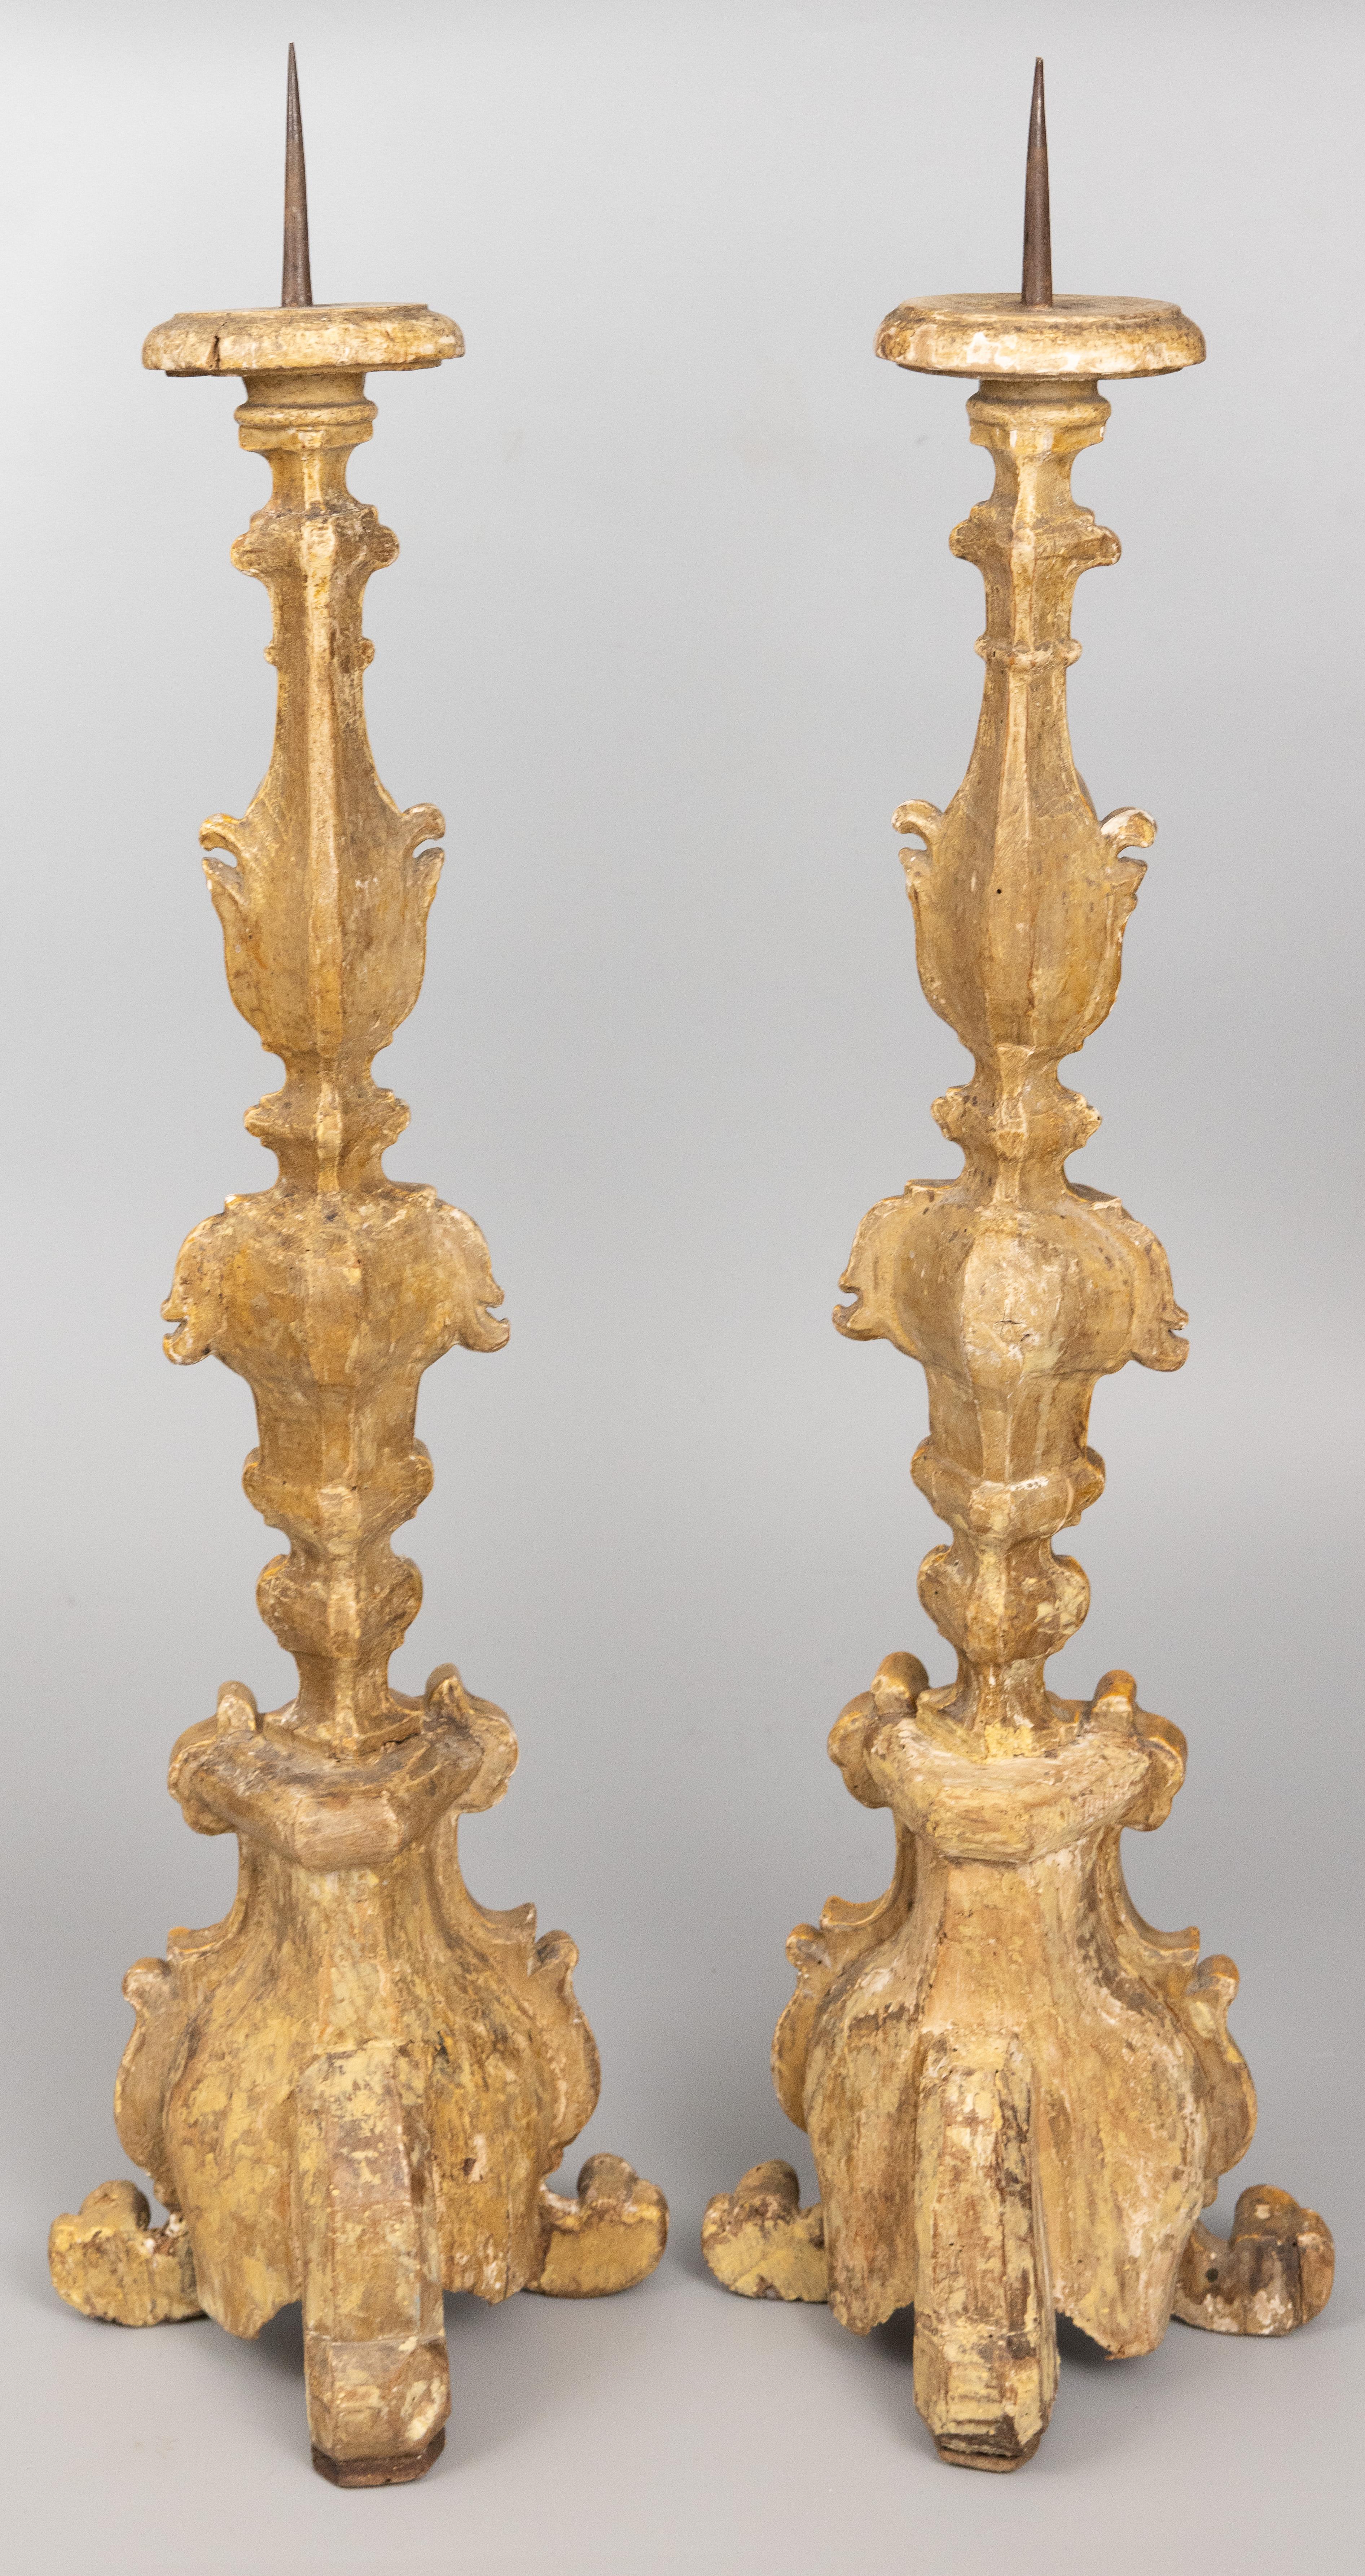 19th Century Pair of 19th C. Italian Giltwood Floor Pricket Candlesticks Torchieres For Sale